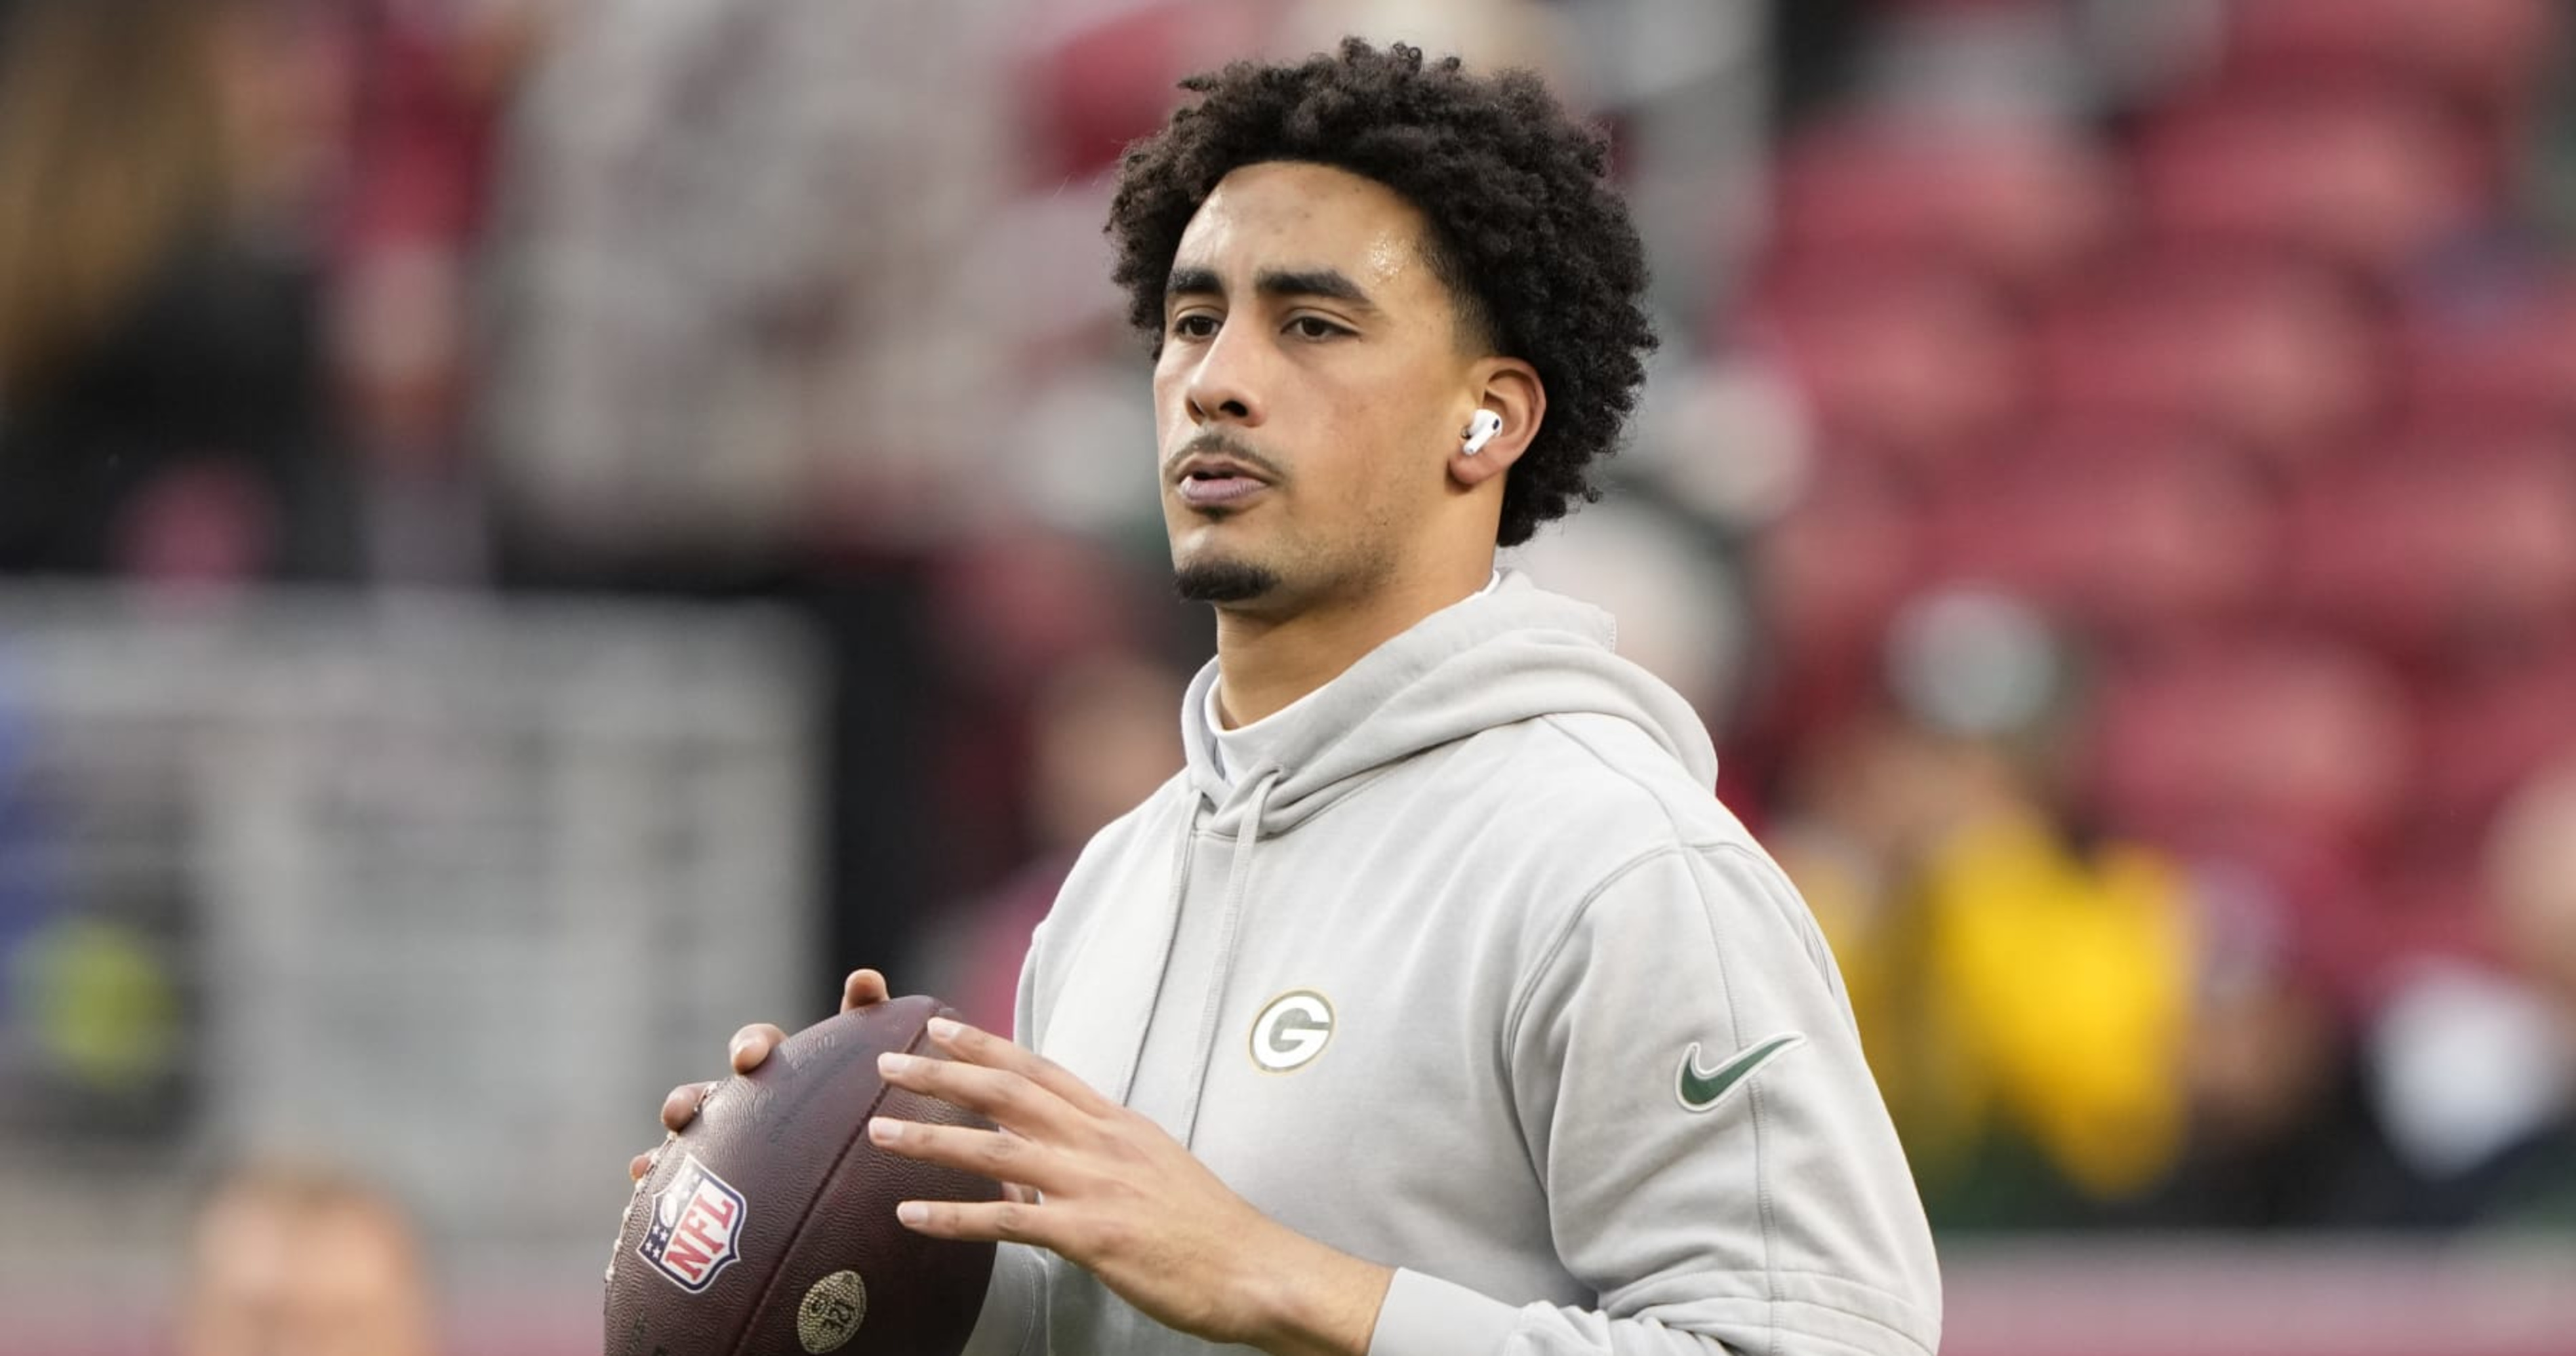 Jordan Love: Packers Will Have 'Target on Our Back' but 'Hungry' for Super Bowl Push